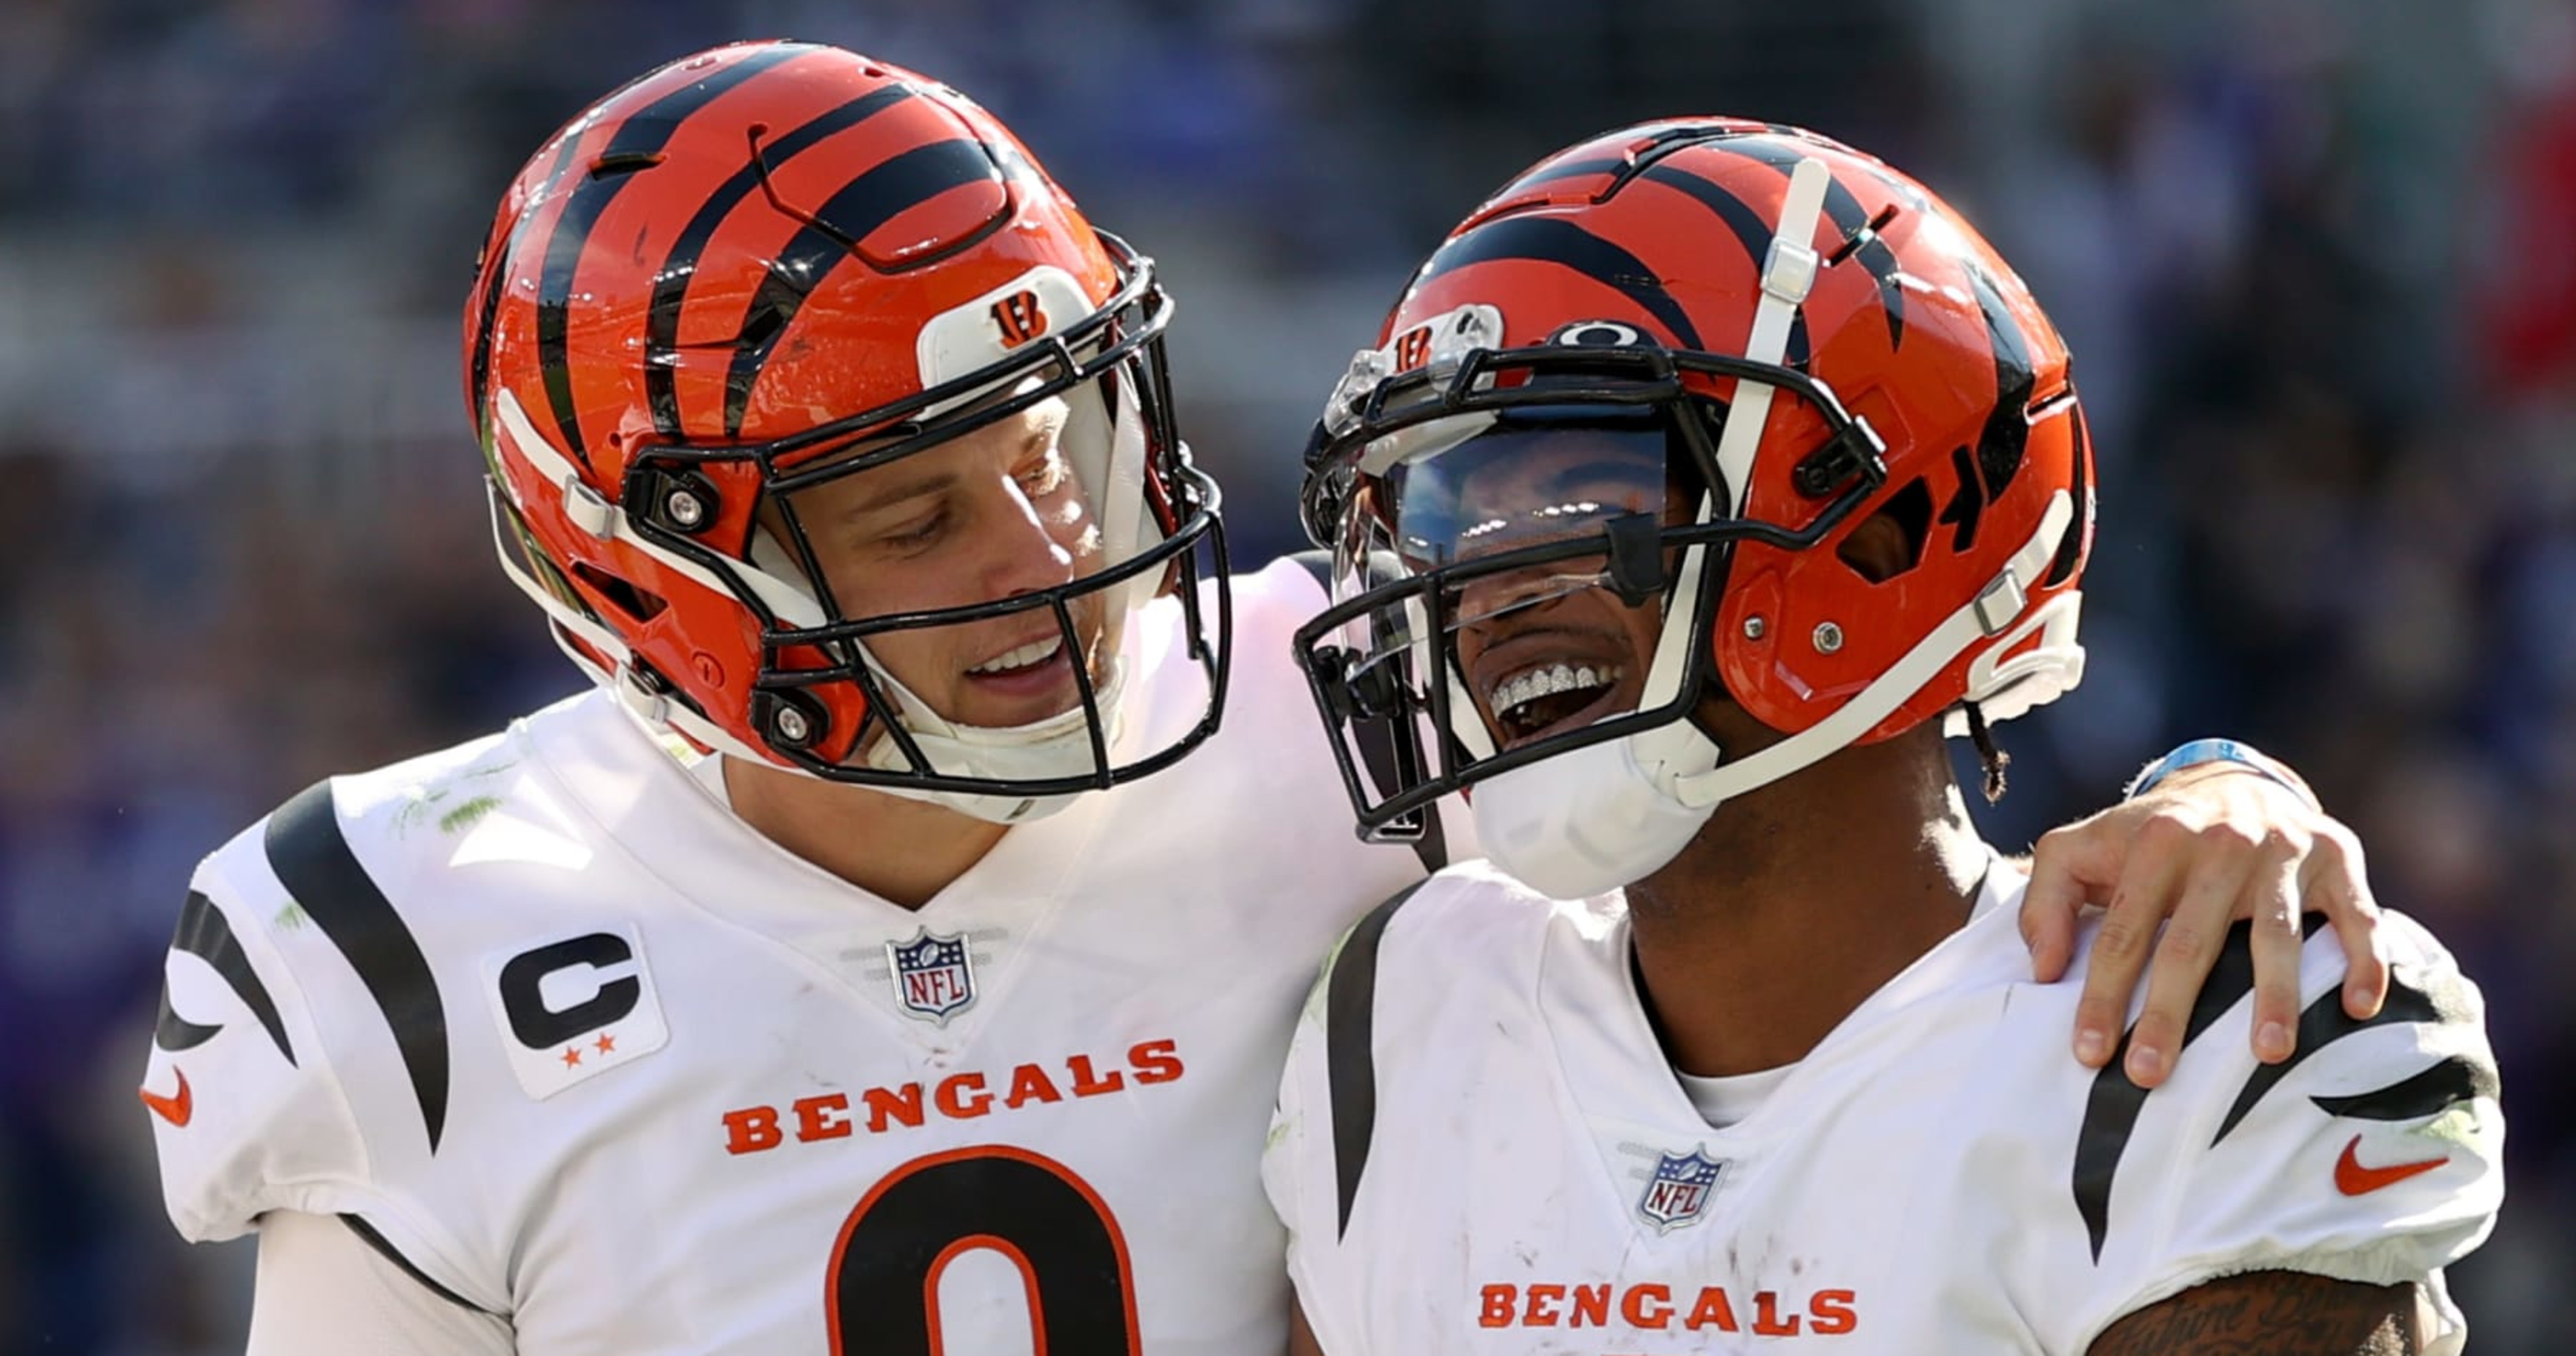 Bengals' Joe Burrow says he's 'ready to go' for Week 1 against